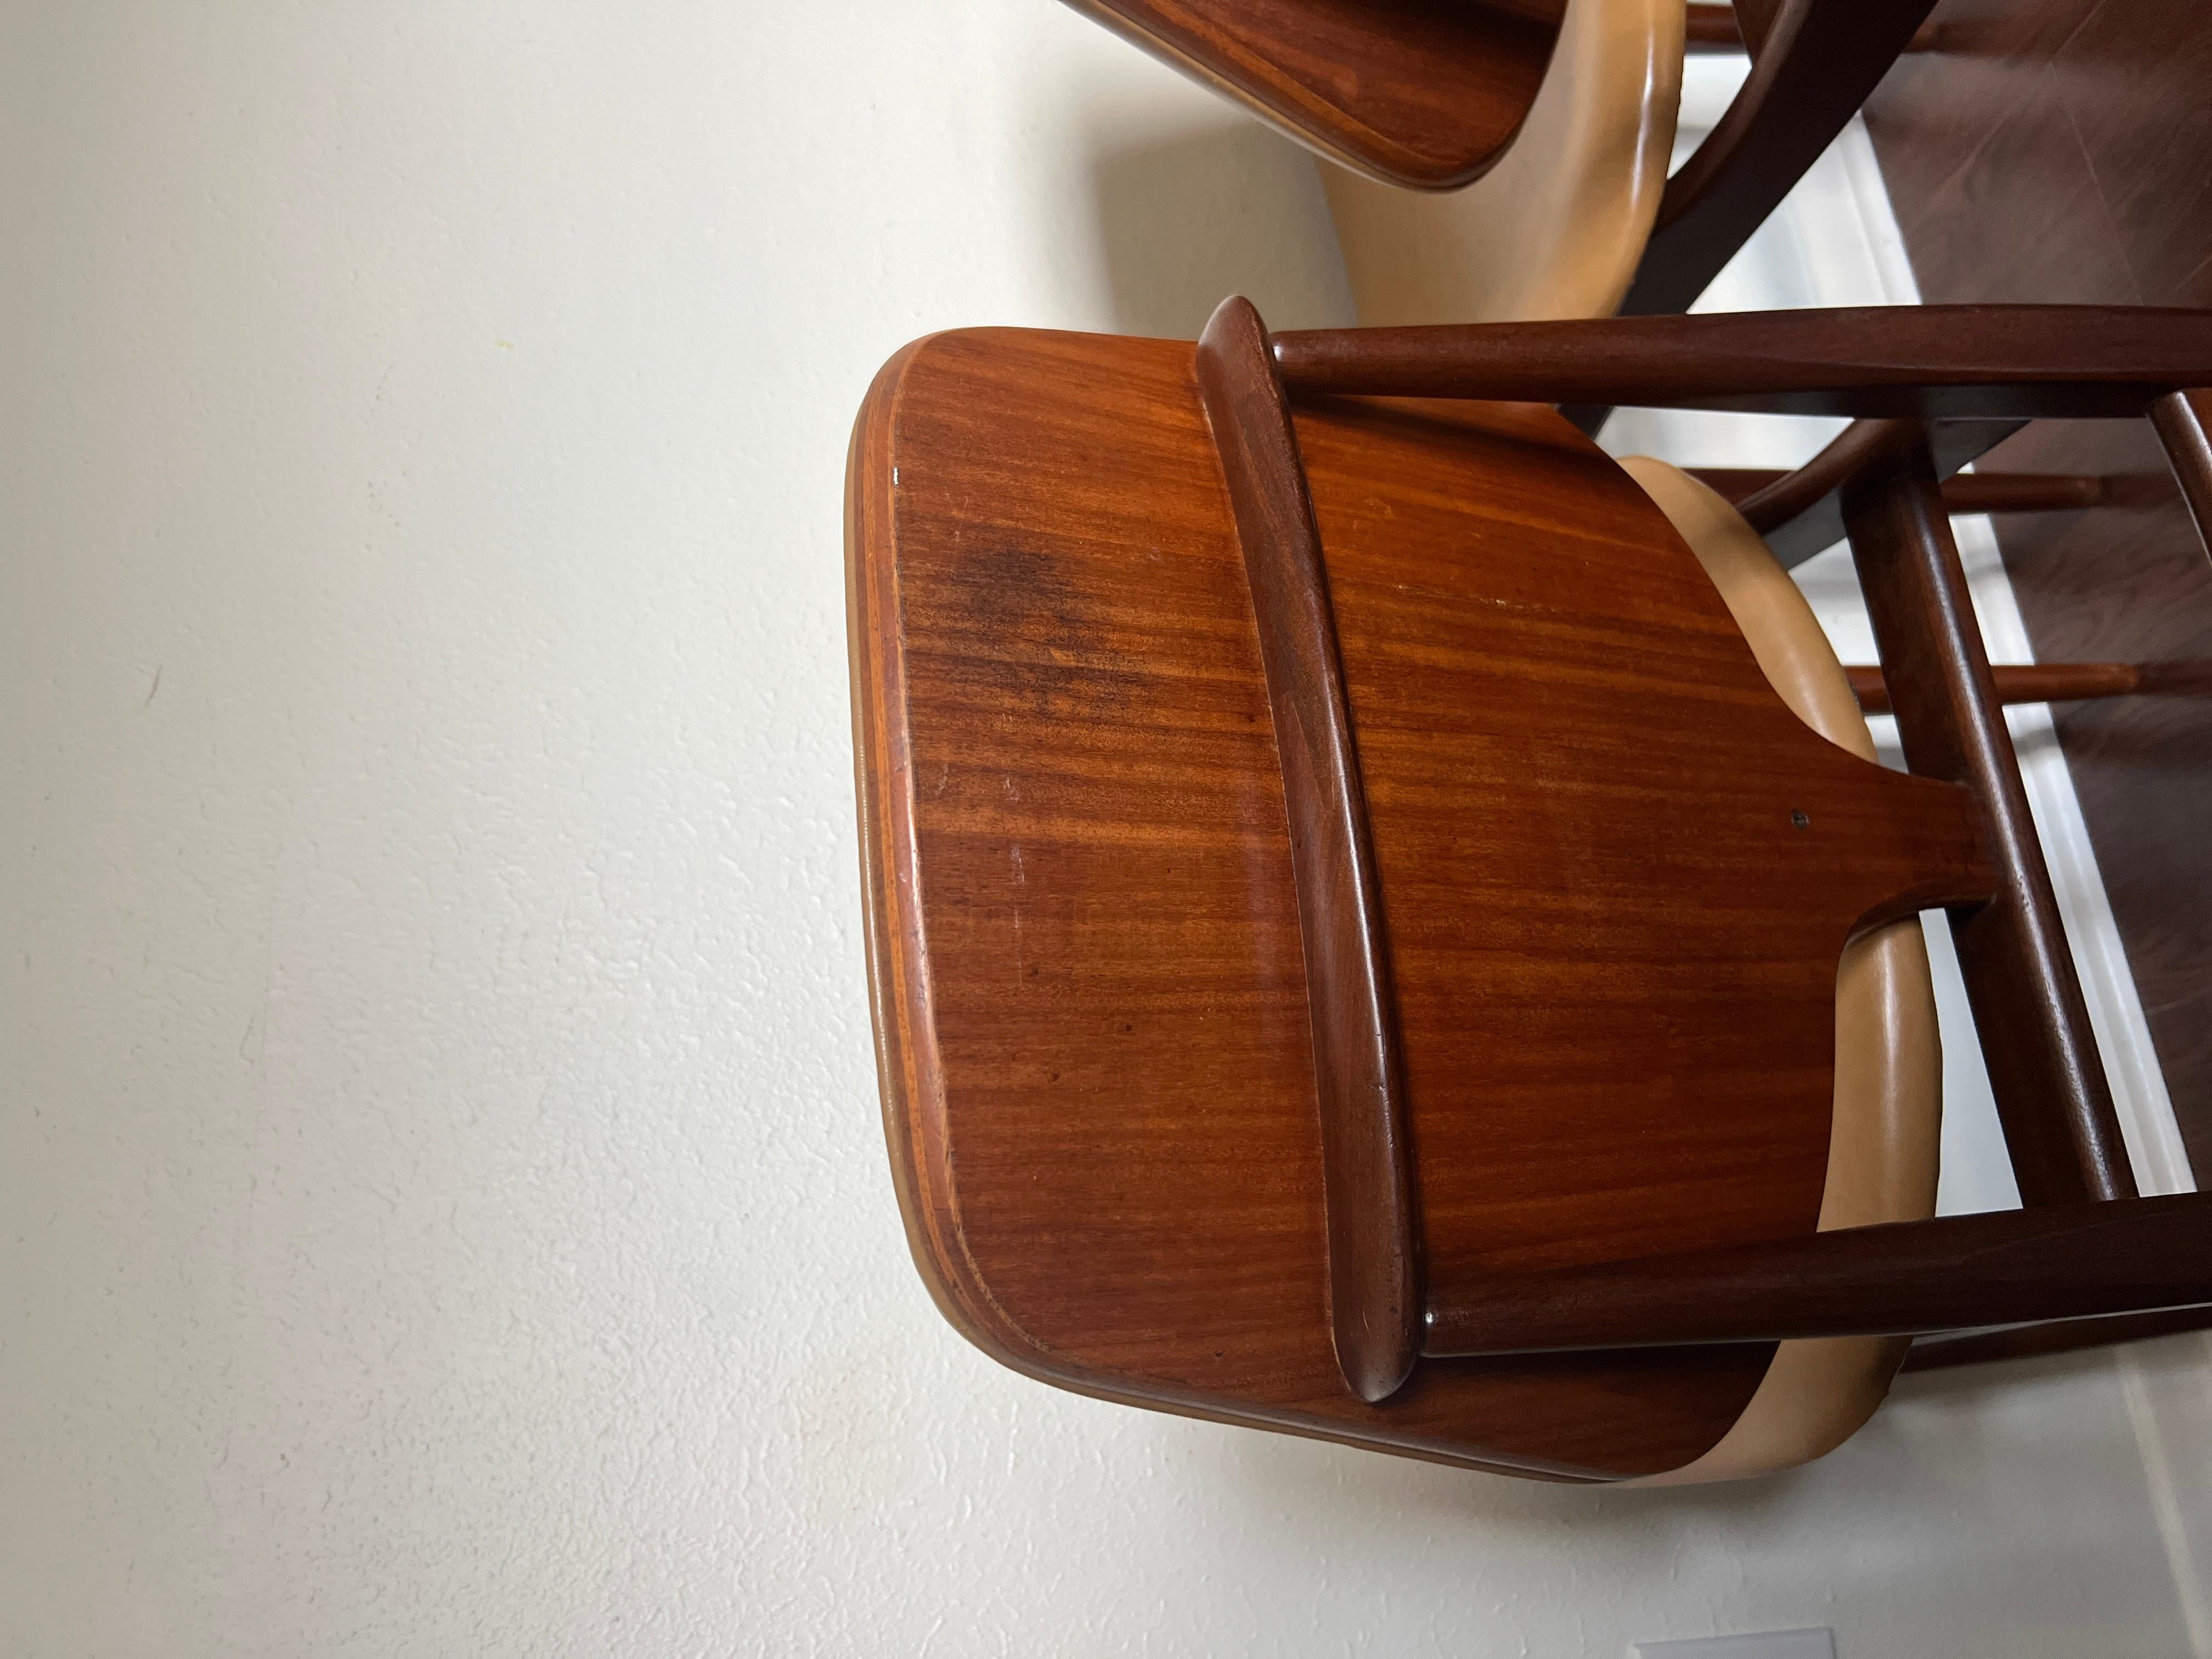 Mid-20th Century A set of 4 mid century modern dining chairs by Elliots of Newbury